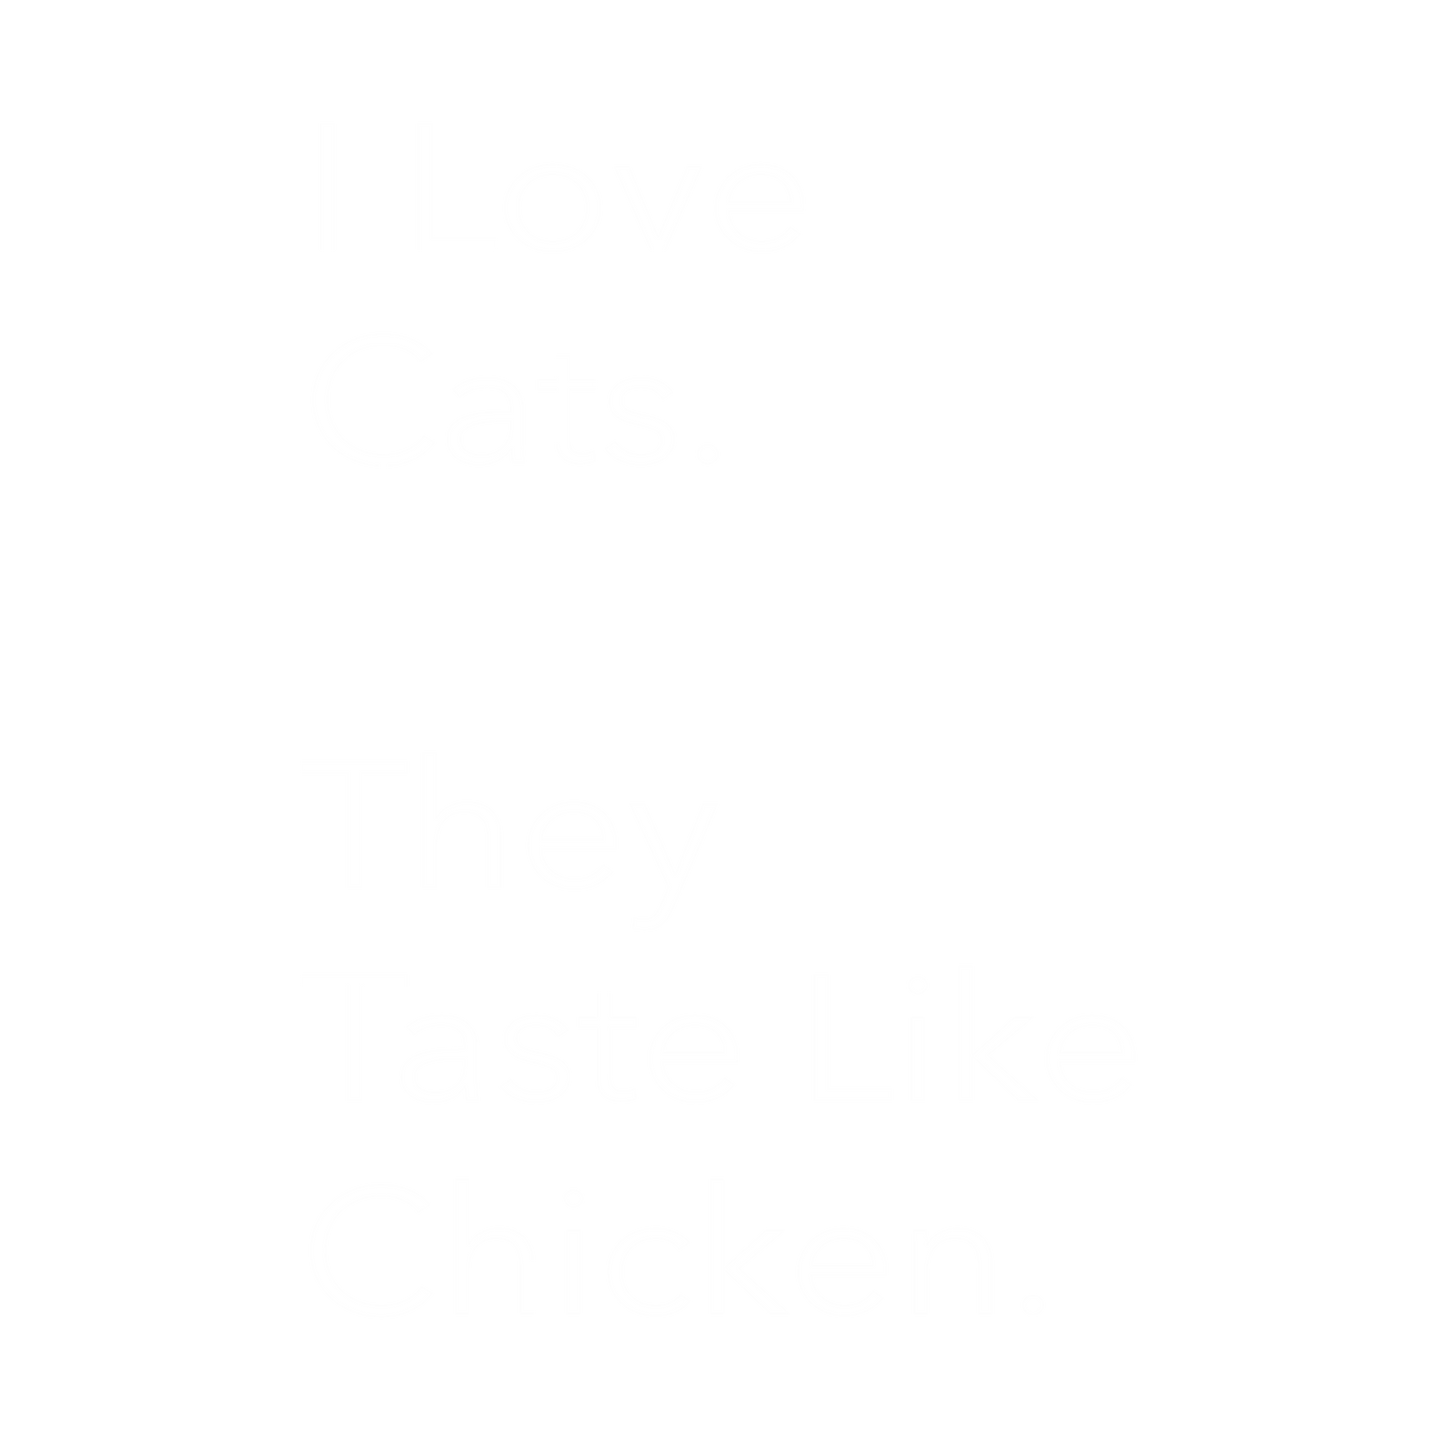 I Love Cats. They Taste Like Chicken